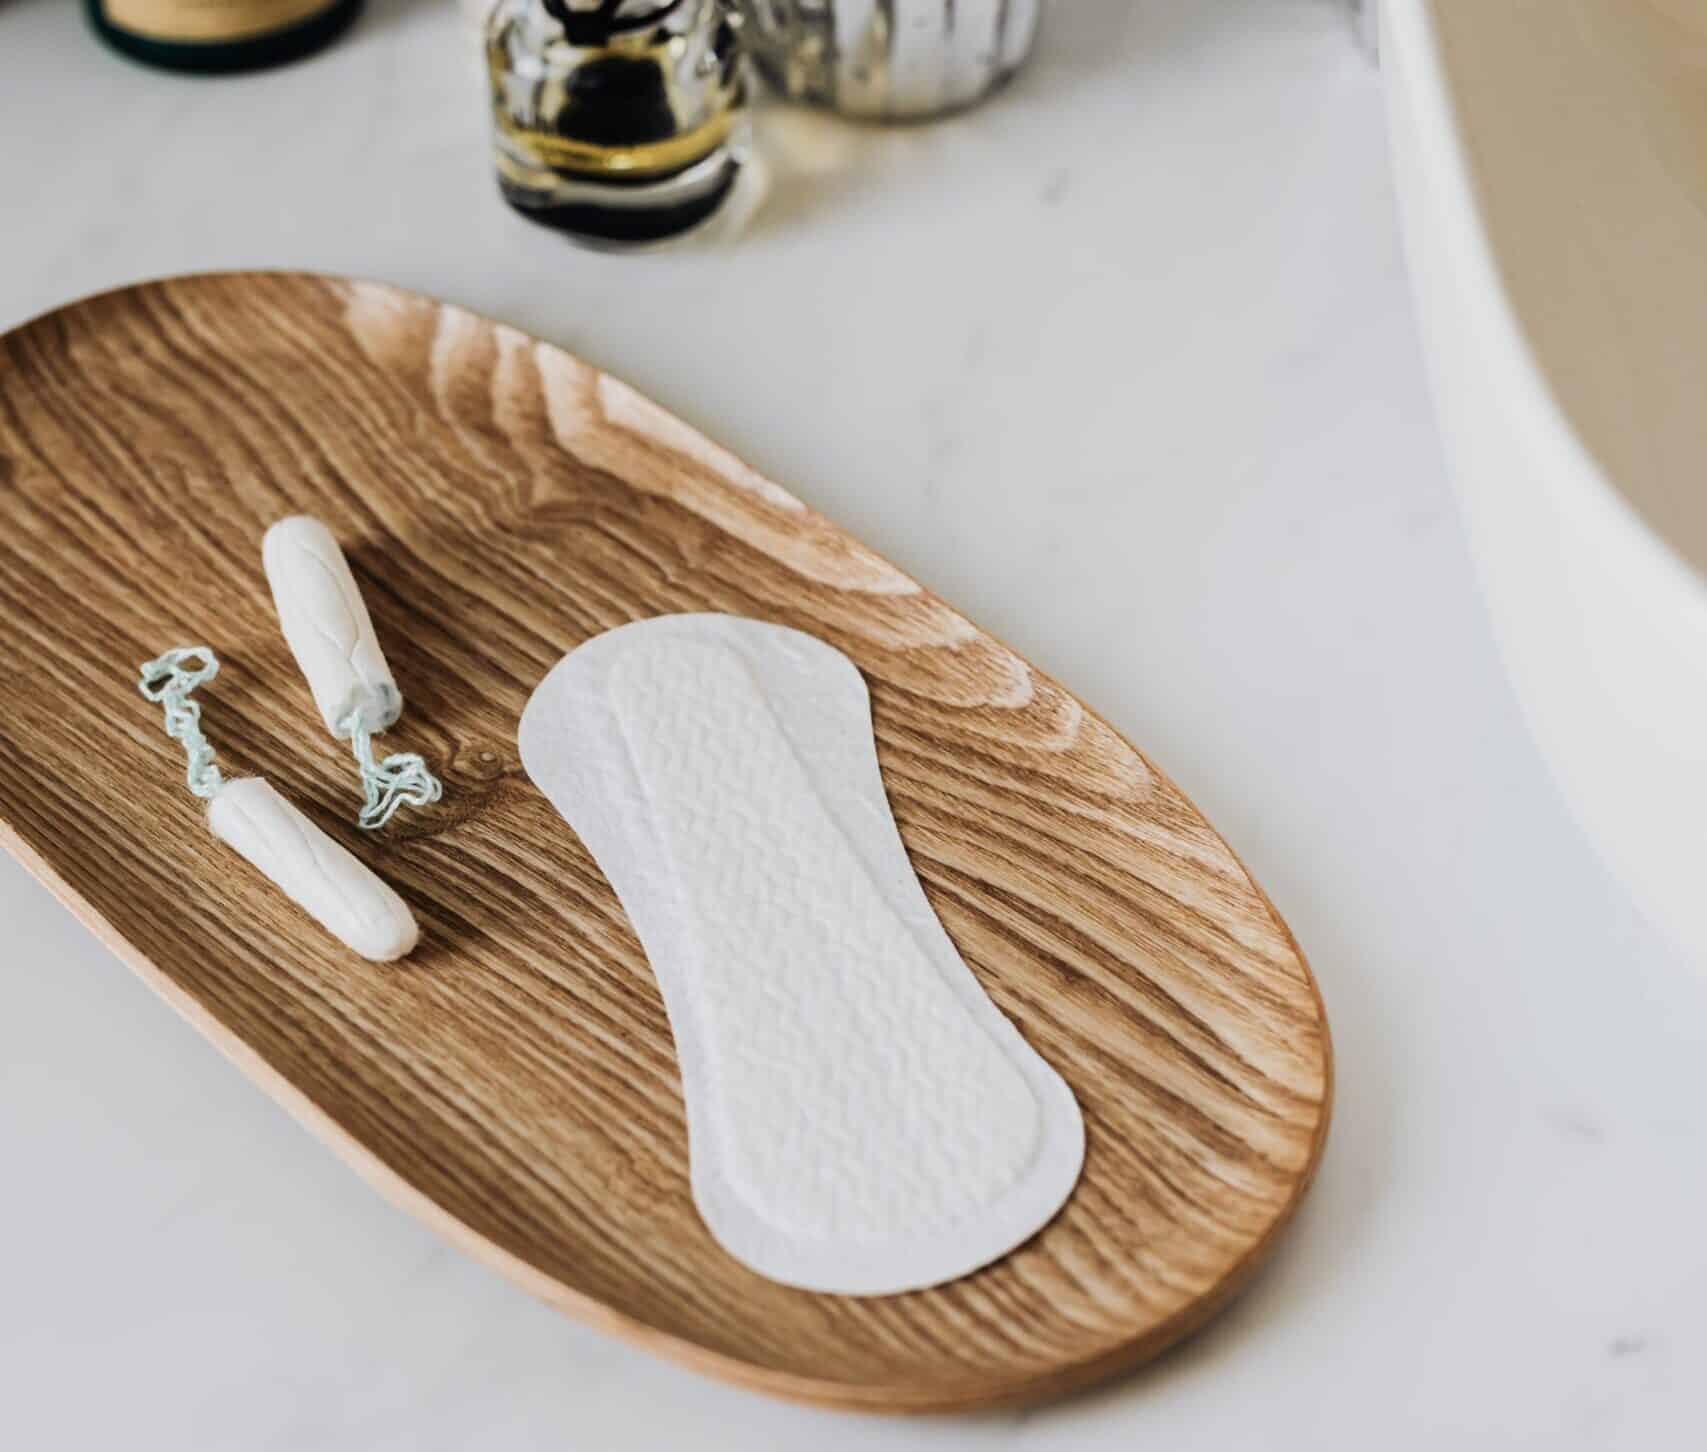 Sanitary napkin with tampons on a wooden tray in the bathroom